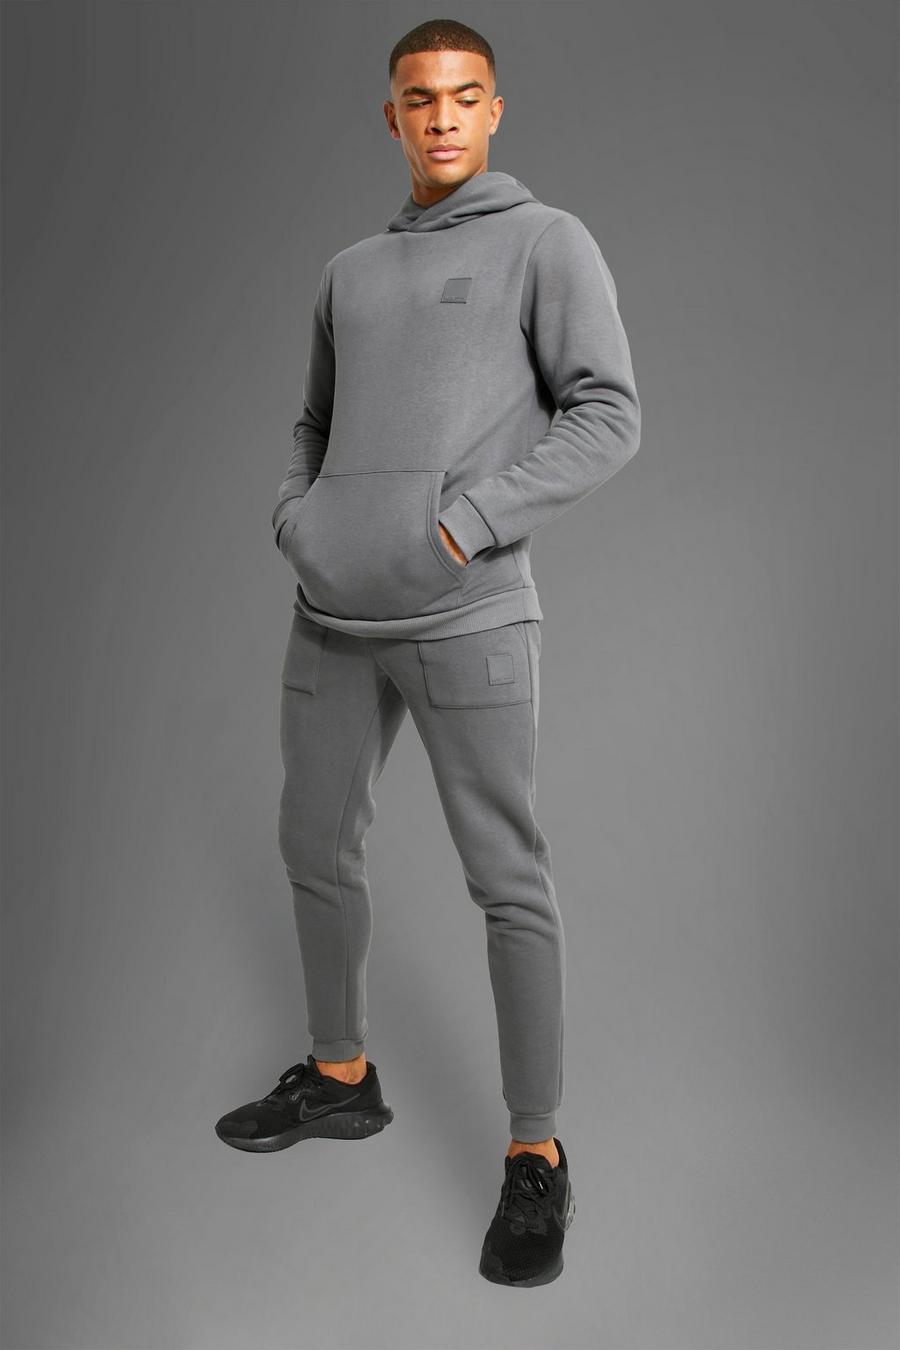 Charcoal grey MAN Active Träningsoverall med hoodie